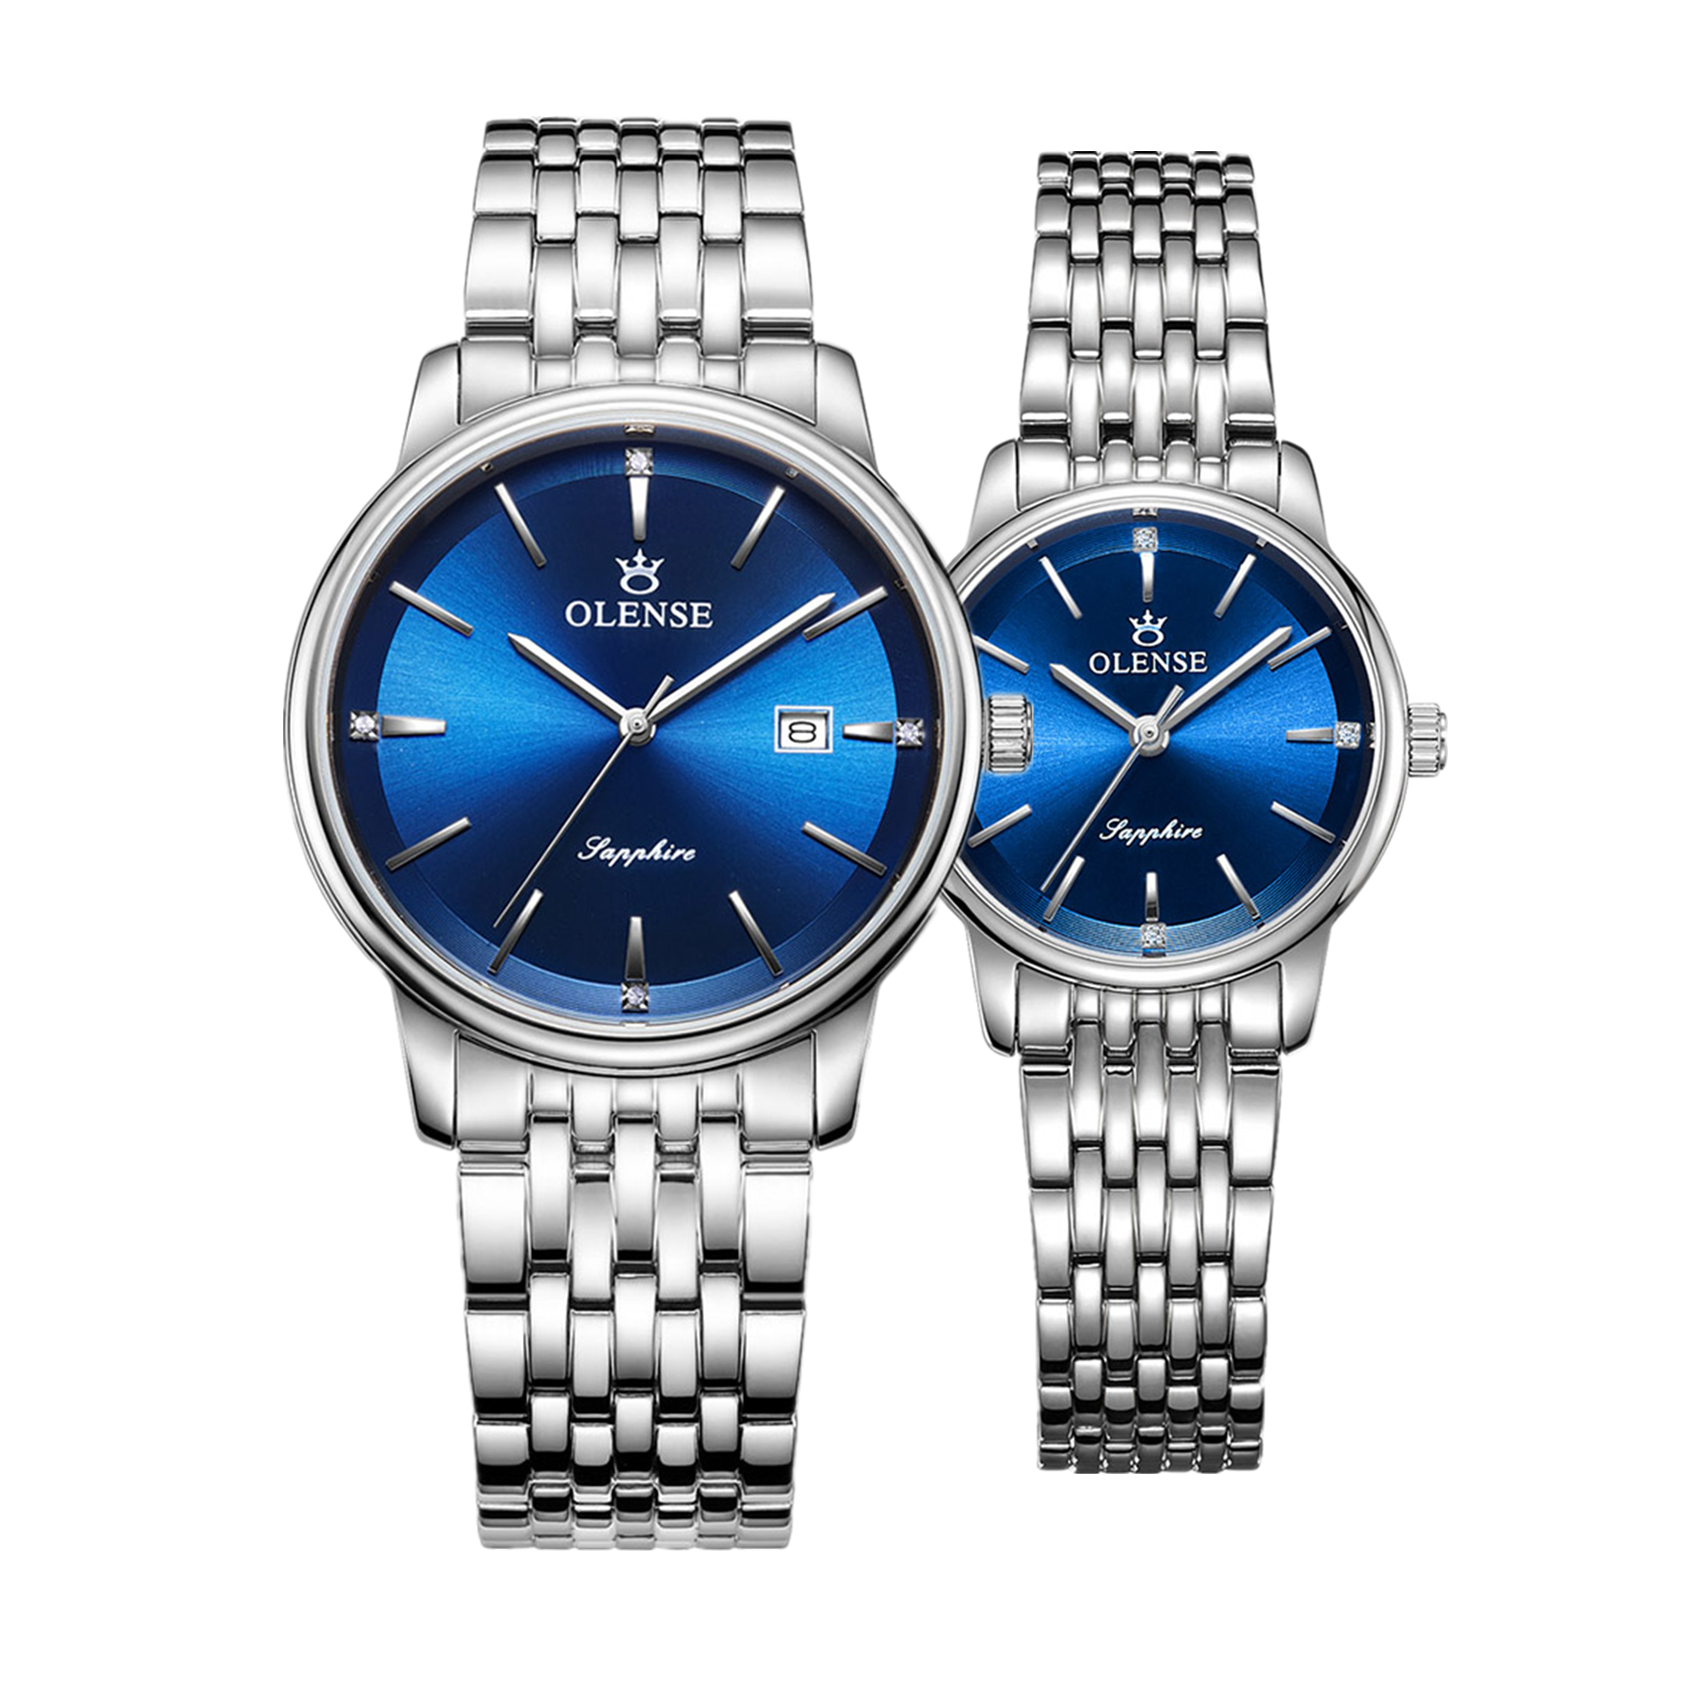 OLENSE - Classic Couple Watch, His & Her Sets, Quartz, Lover Gift, Blue